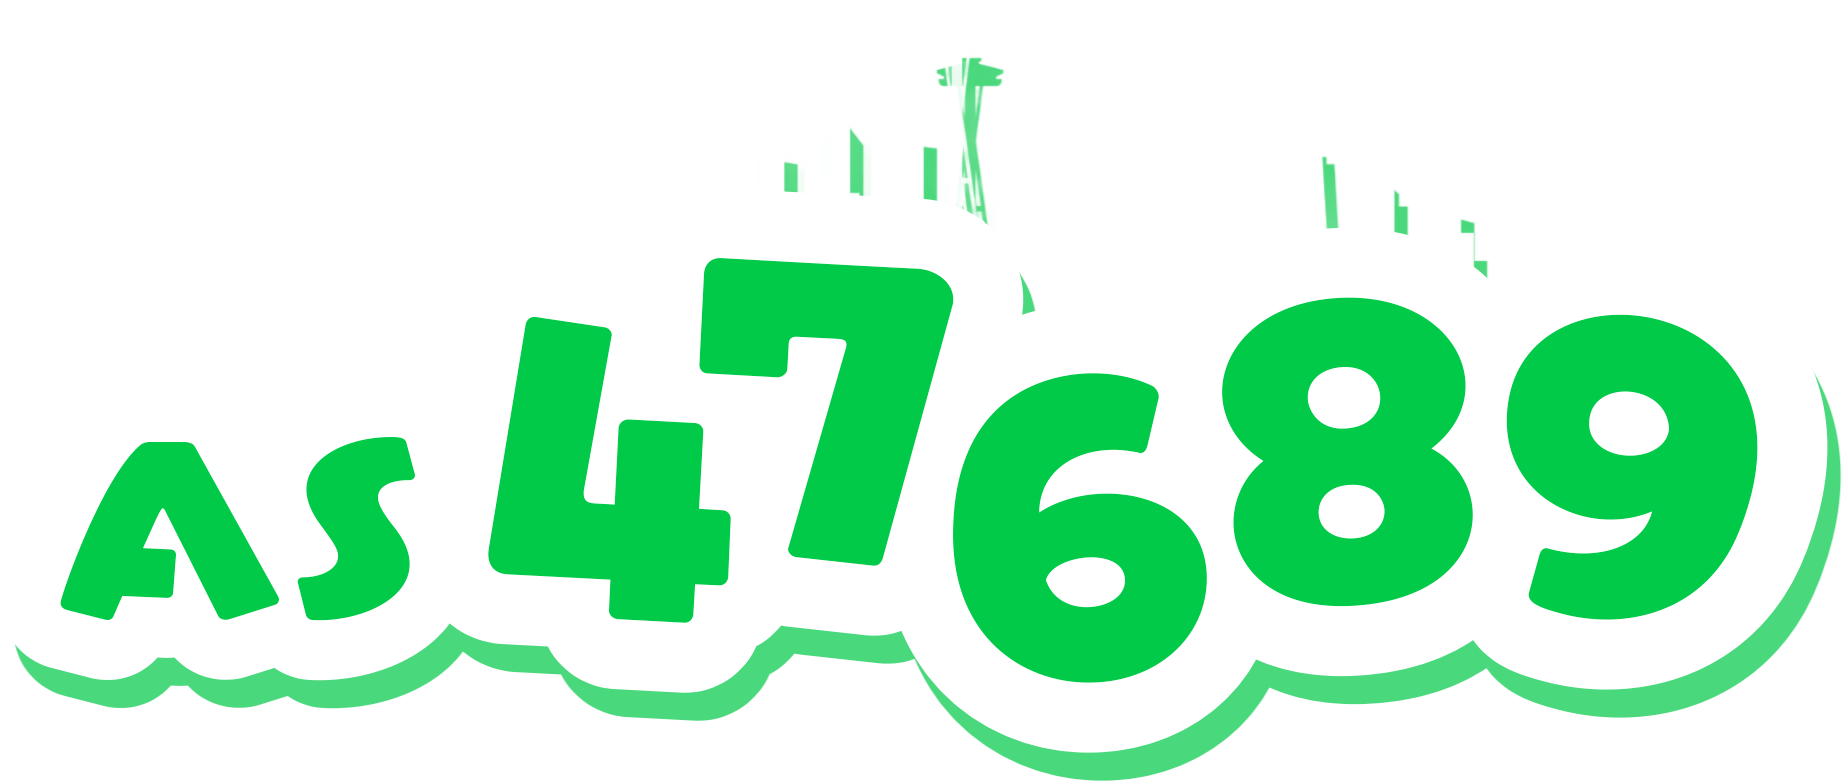 Picture of stylized text in green with a white outline. The text reads AS47689.